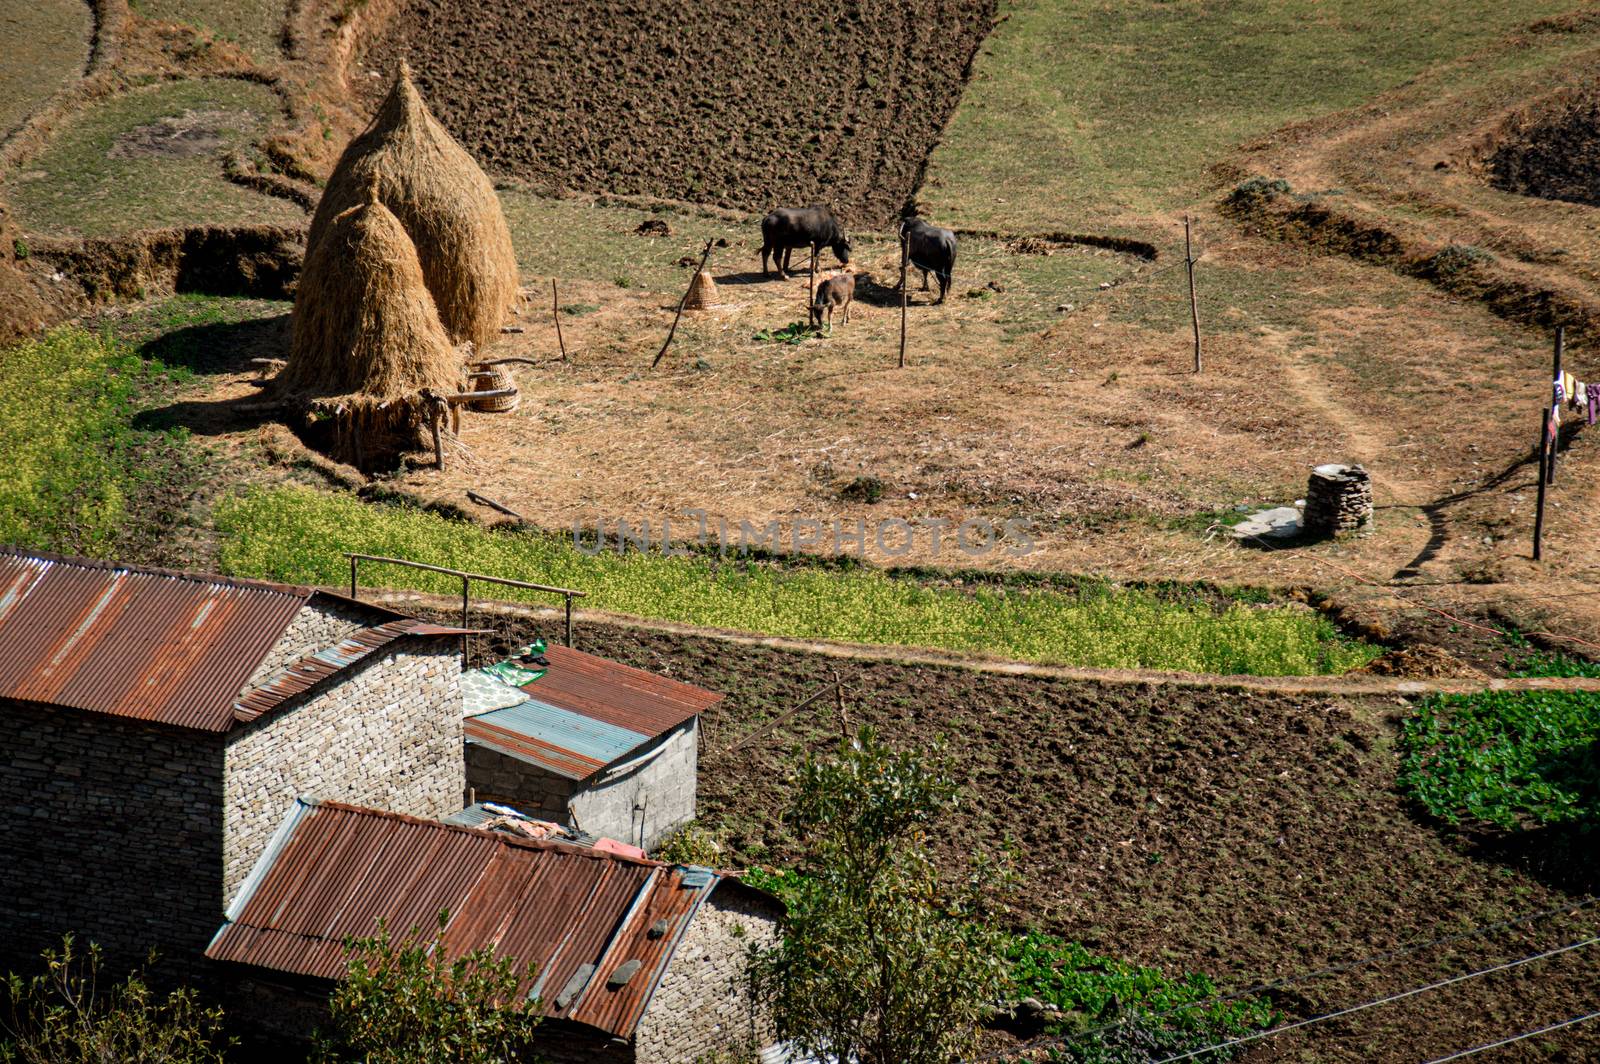 Farm and livestock in the mountain village of Ghorepani in Pokhara by Sonnet15